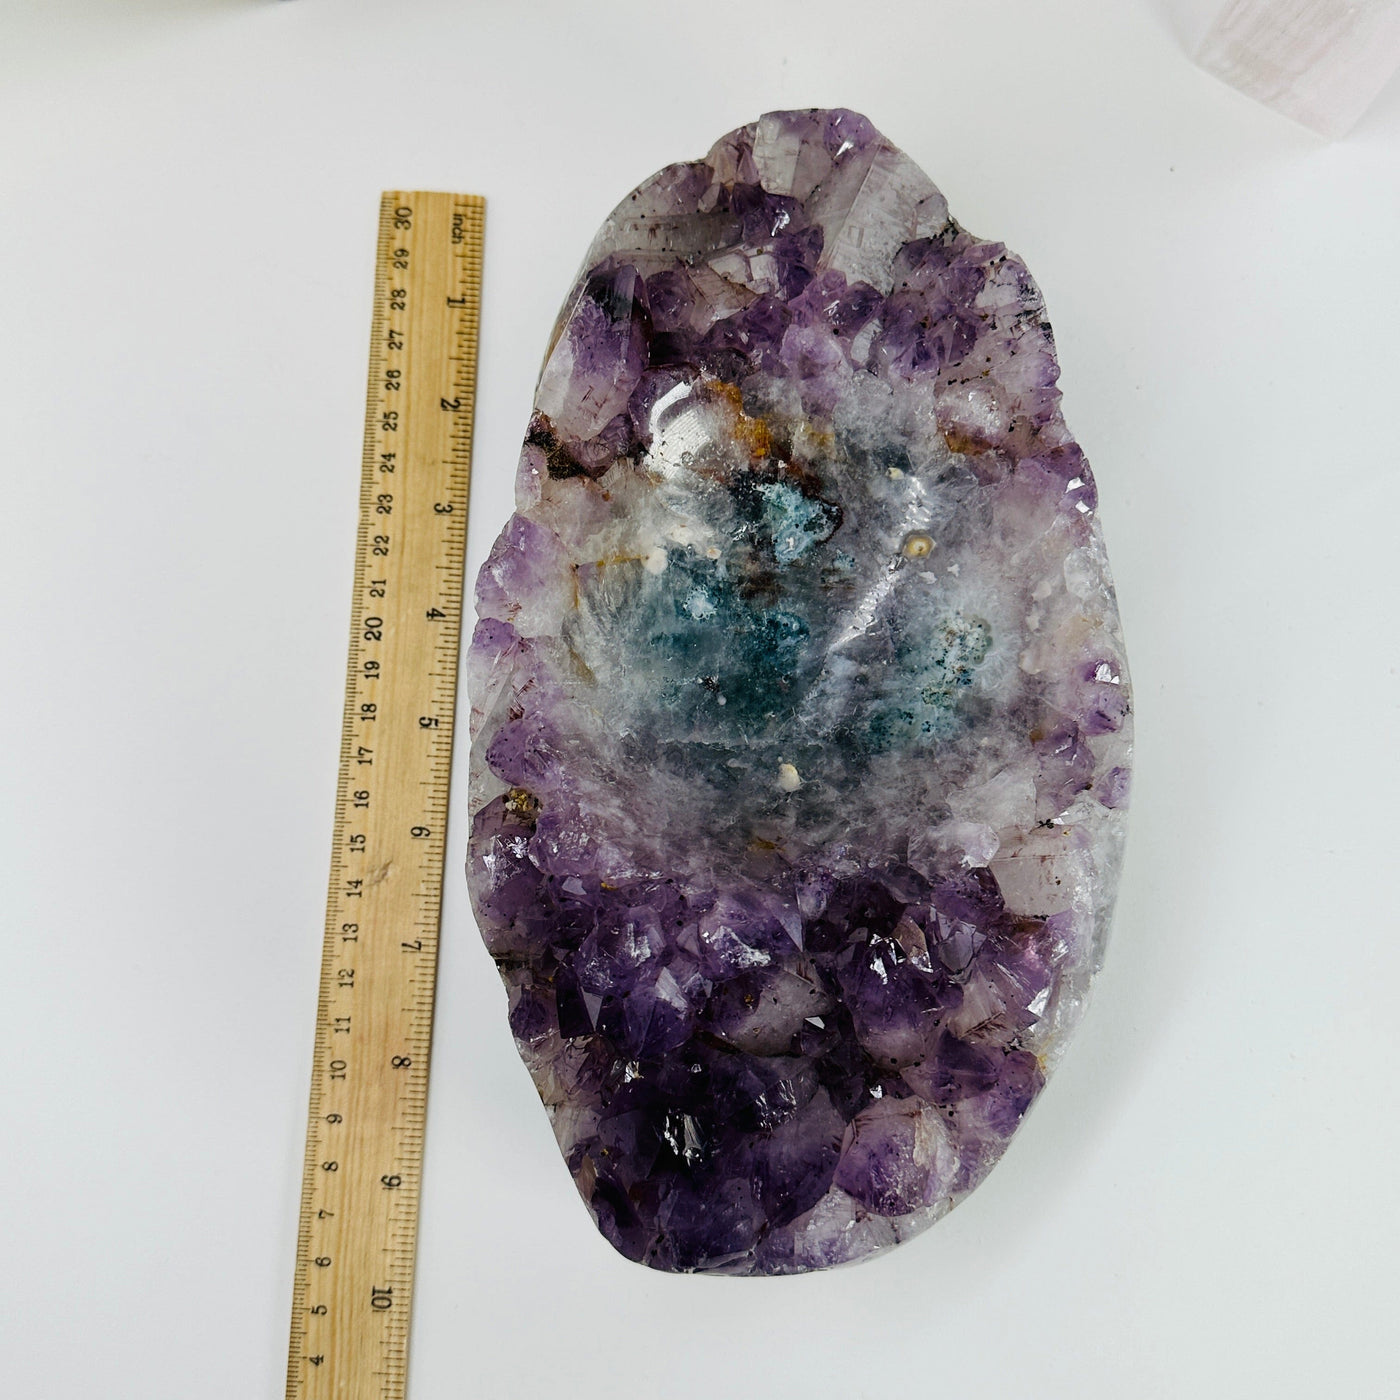 amethyst bowl next to a ruler for size reference